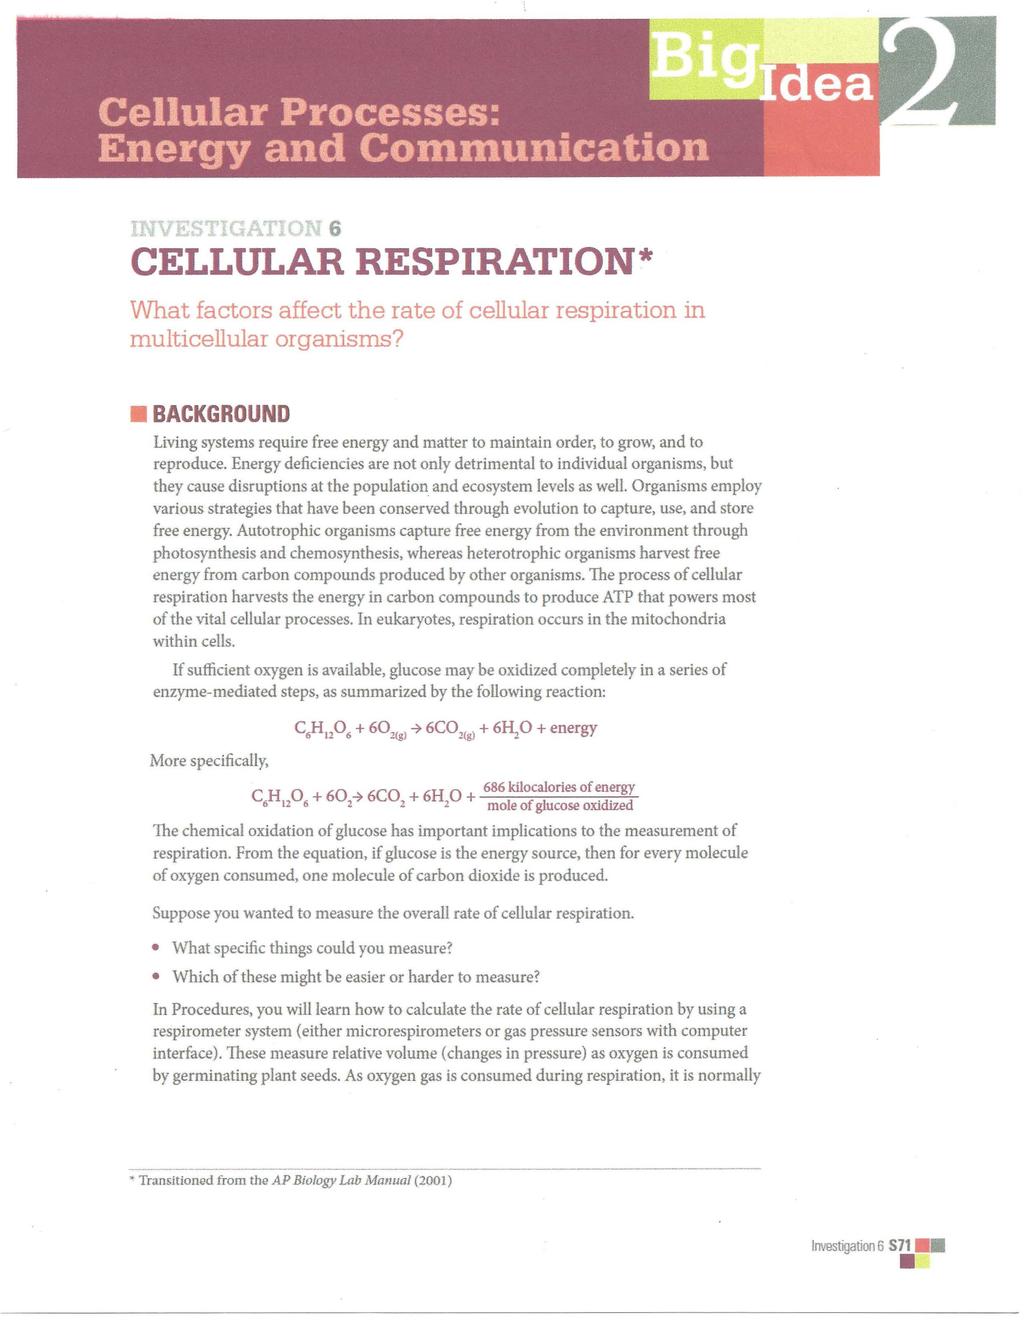 INV~t:;TIGATION 6 CELLULAR RESPIRATION* What factors affect the rate of cellular respiration in multicellular organisms?